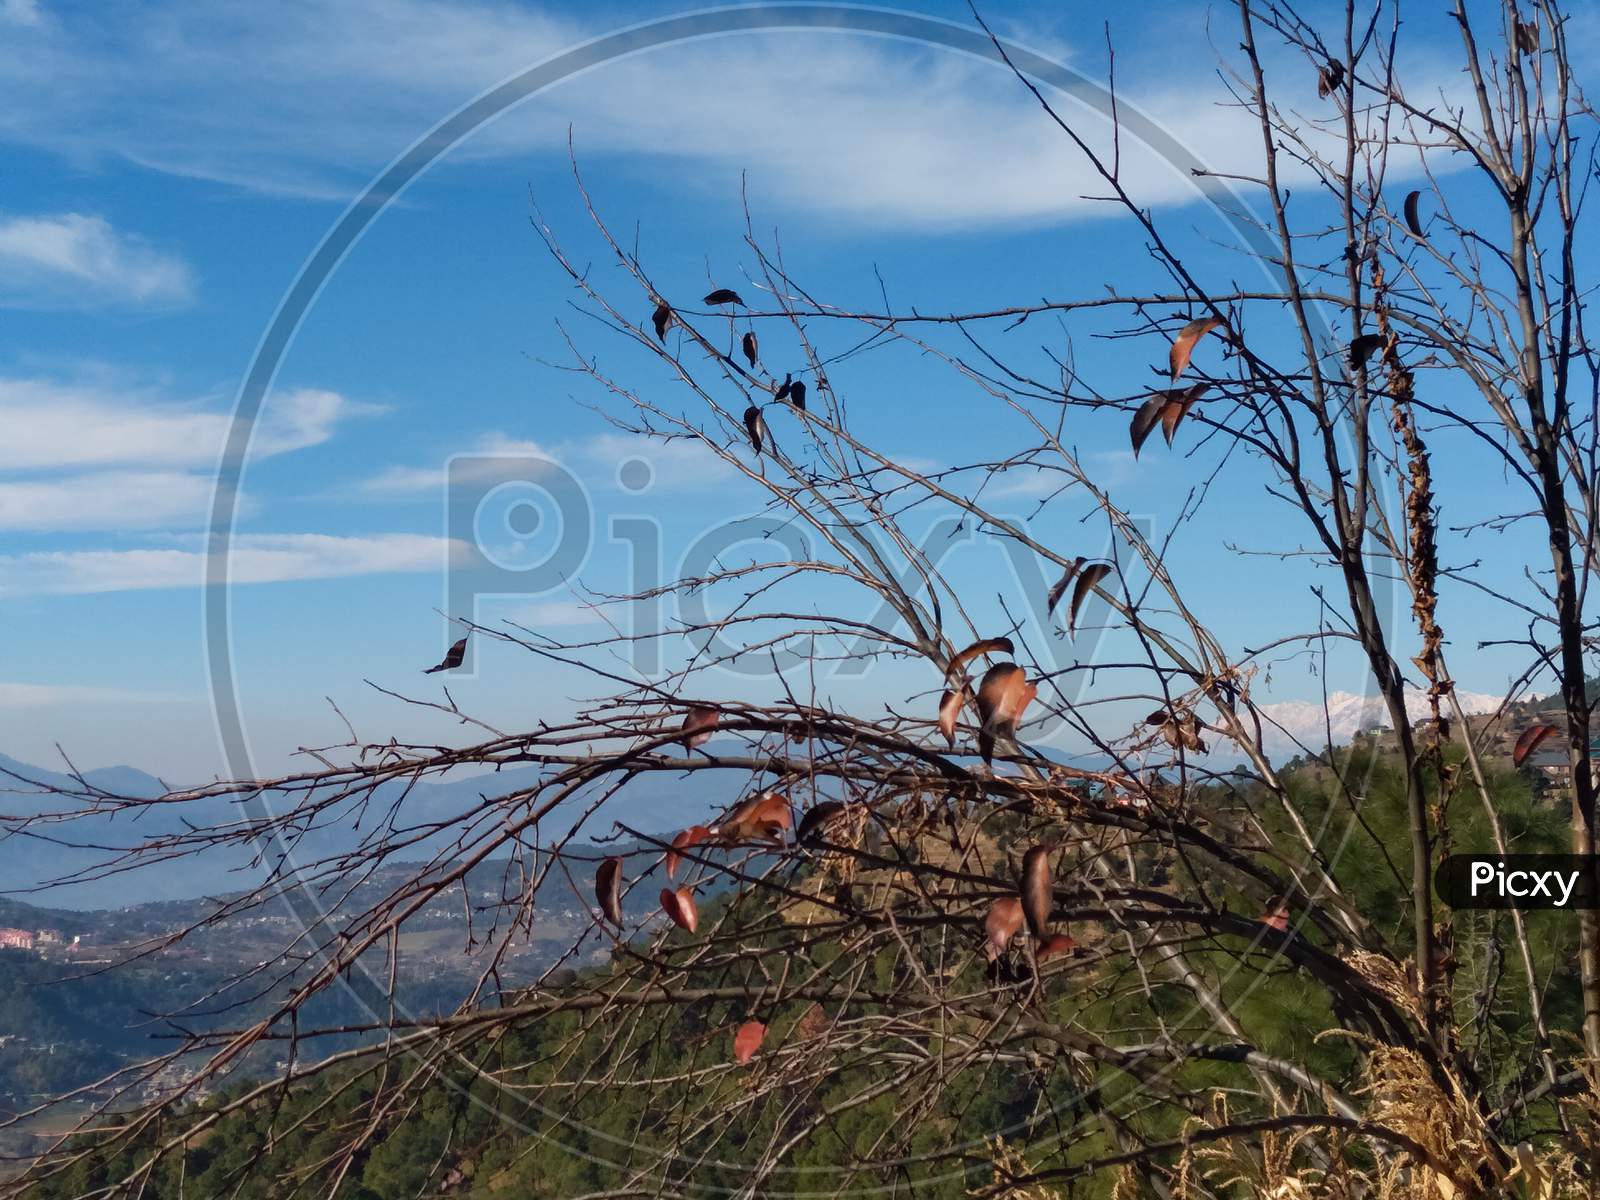 Capture of a beautiful pyrus pashia tree with lovely landscape in background in spring season in hilly area of Himachal pradesh, India